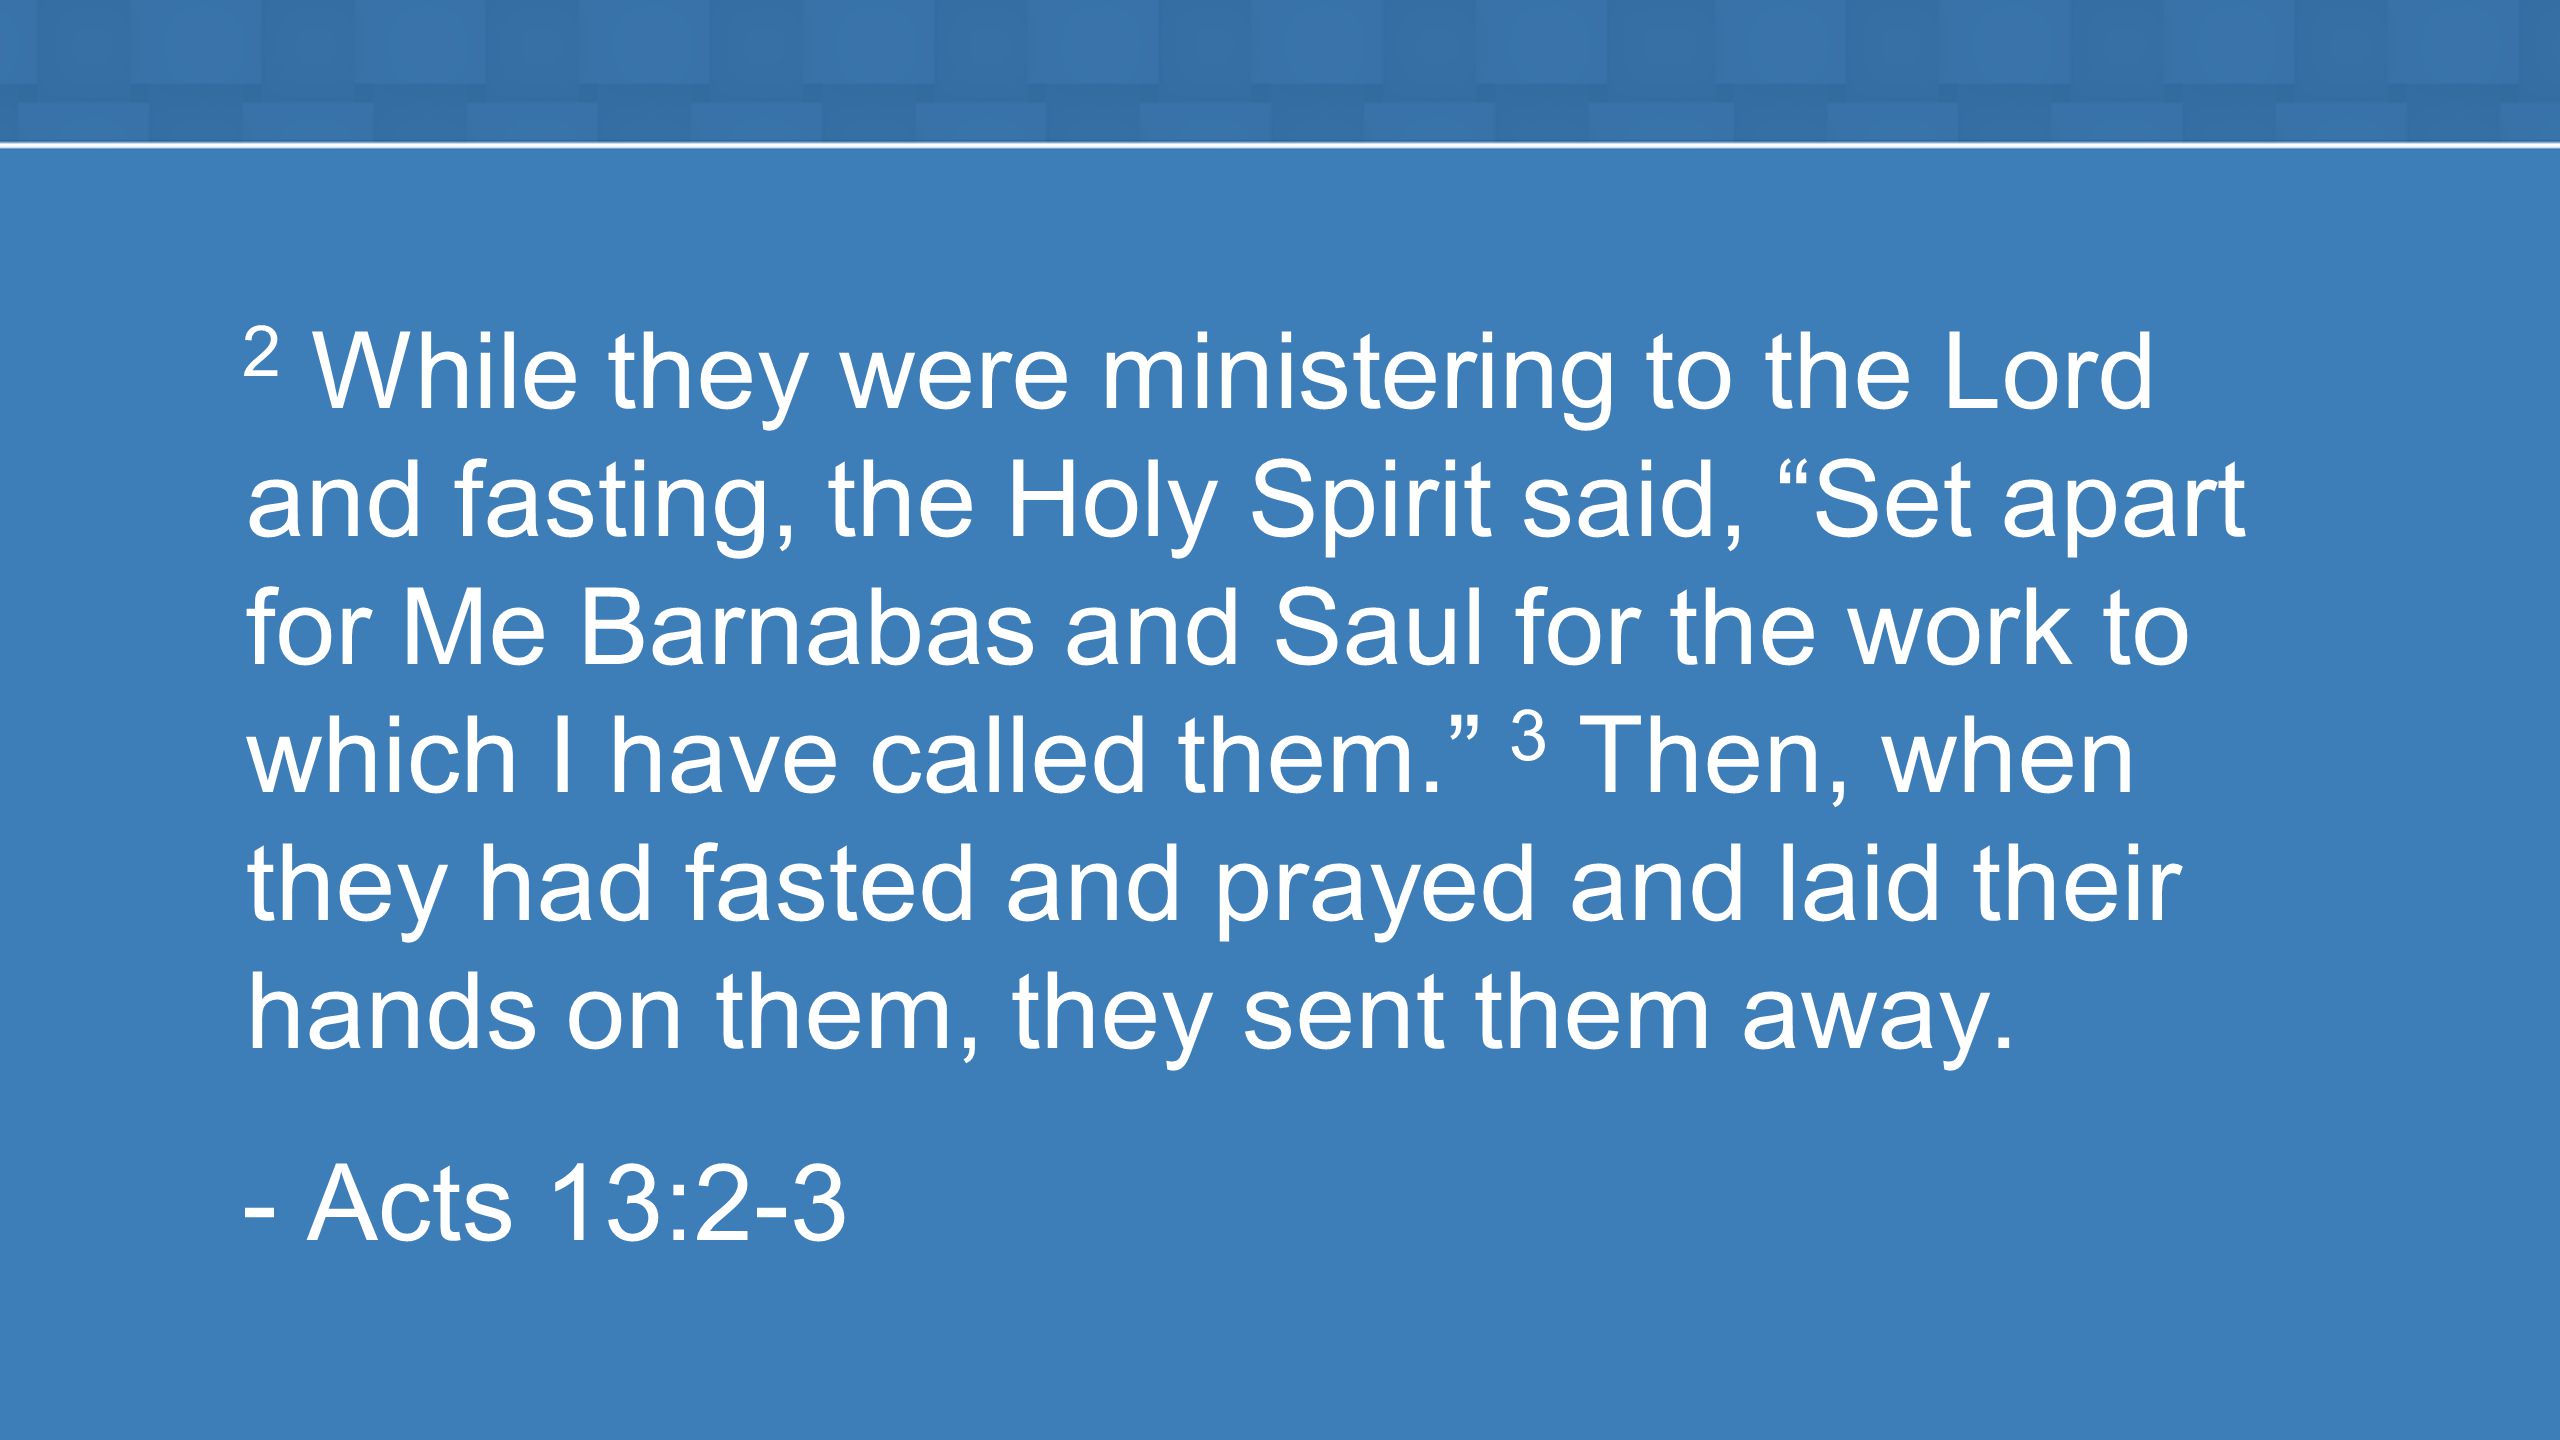 2 While they were ministering to the Lord and fasting, the Holy Spirit said, Set apart for Me Barnabas and Saul for the work to which I have called them. 3 Then, when they had fasted and prayed and laid their hands on them, they sent them away.